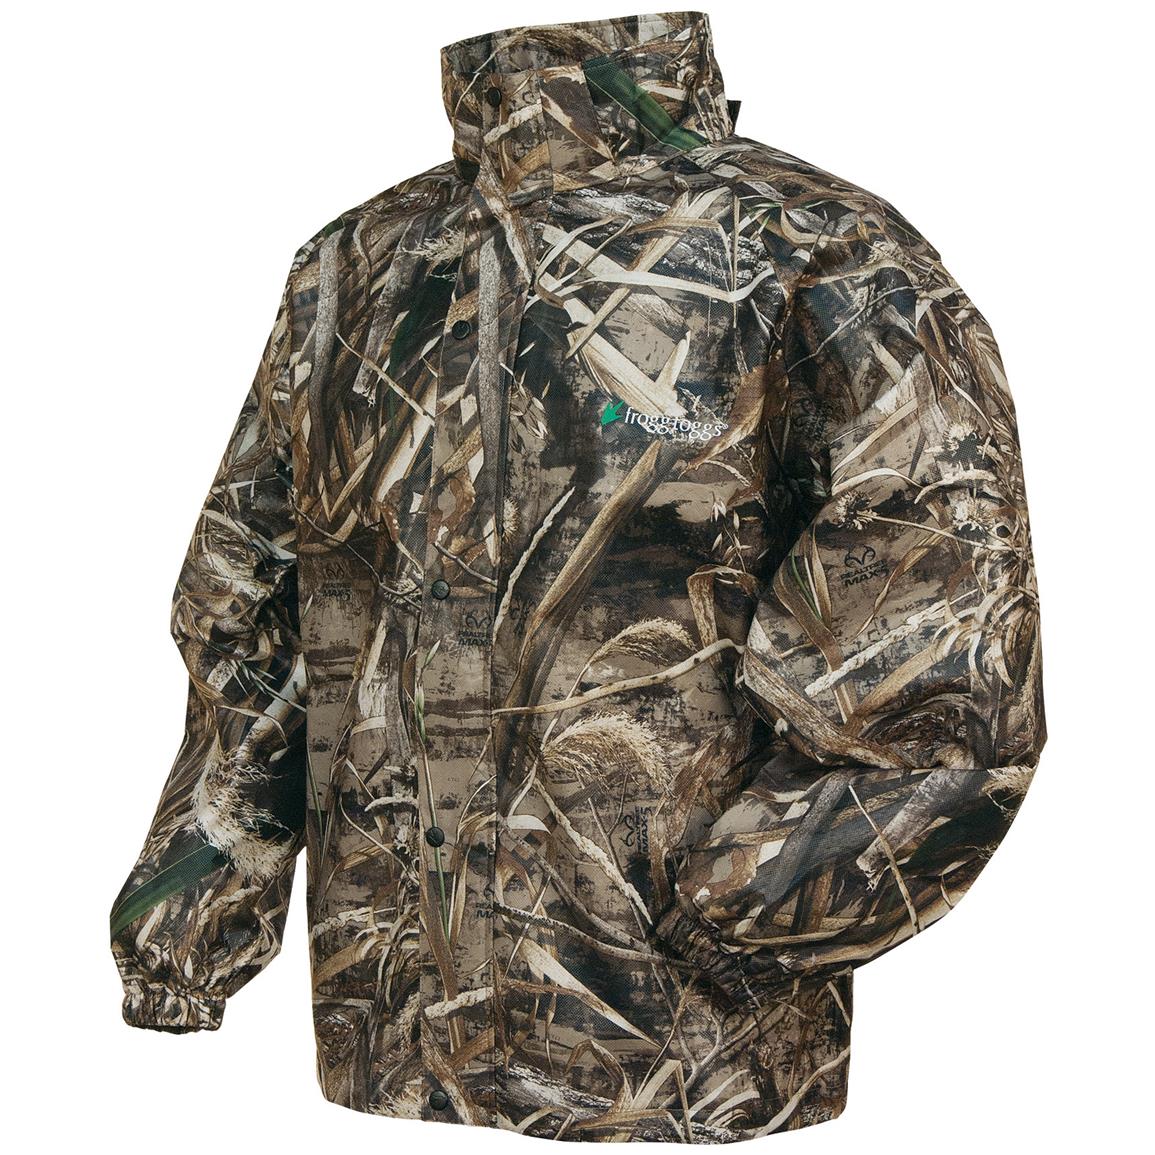 frogg toggs All Sport Camo Rain Suit - Jacket